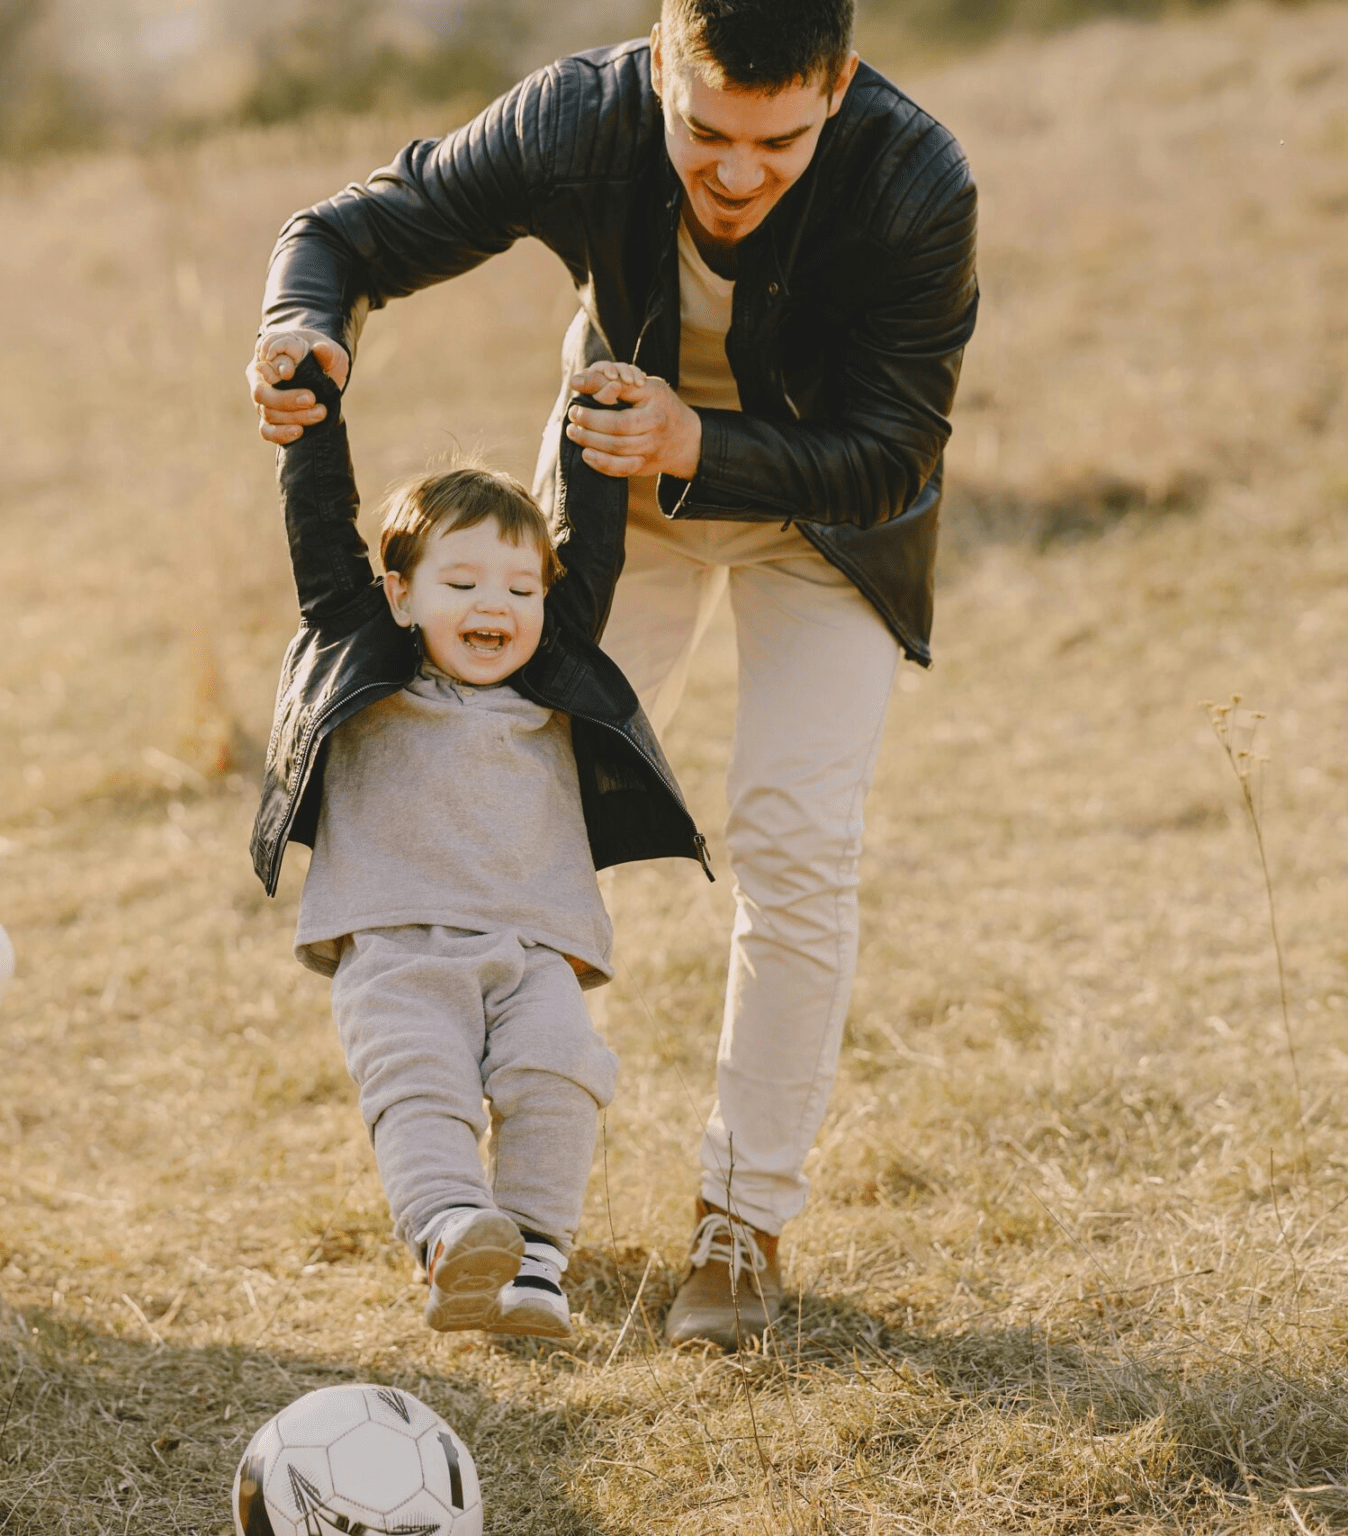 baby and father enjoying physical activities רפואה סינית, צרו קשר